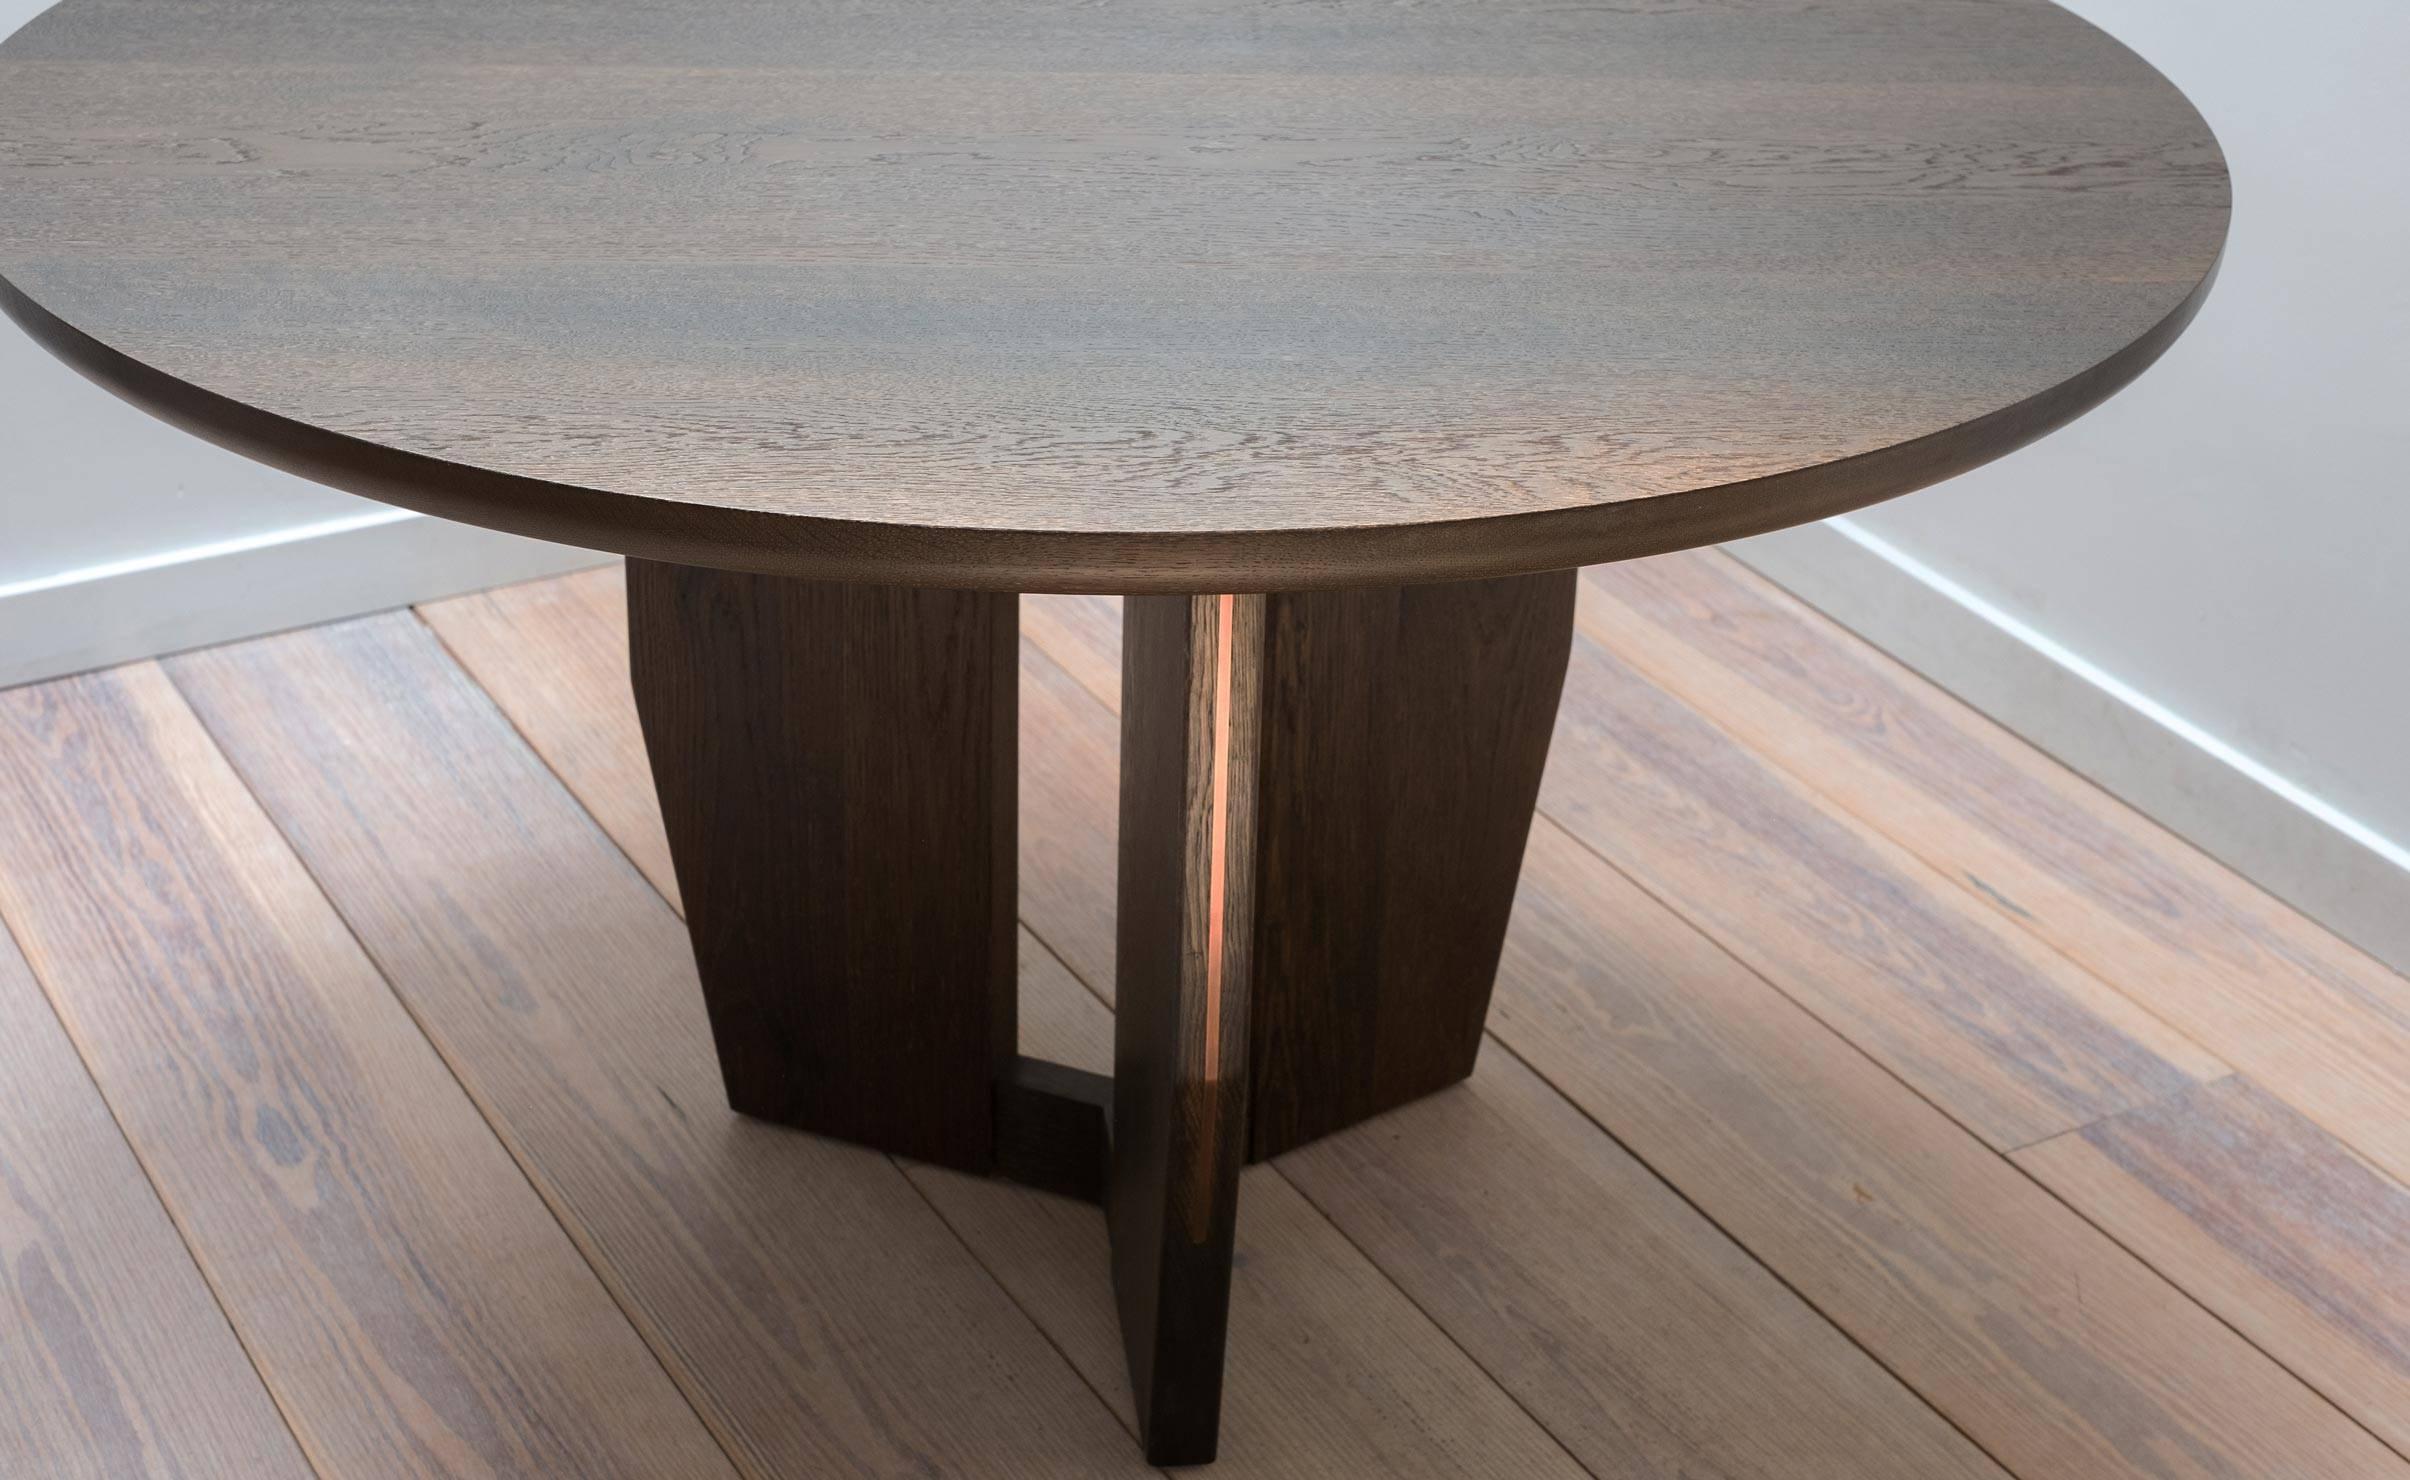 The Symmetrical Table, an elegant dining or center table, is made from hand-selected White Oak and features striking brass details. A trio of tapered wooden fins form a base of ample strength, but not mass. This piece is made by hand in Stillmade's